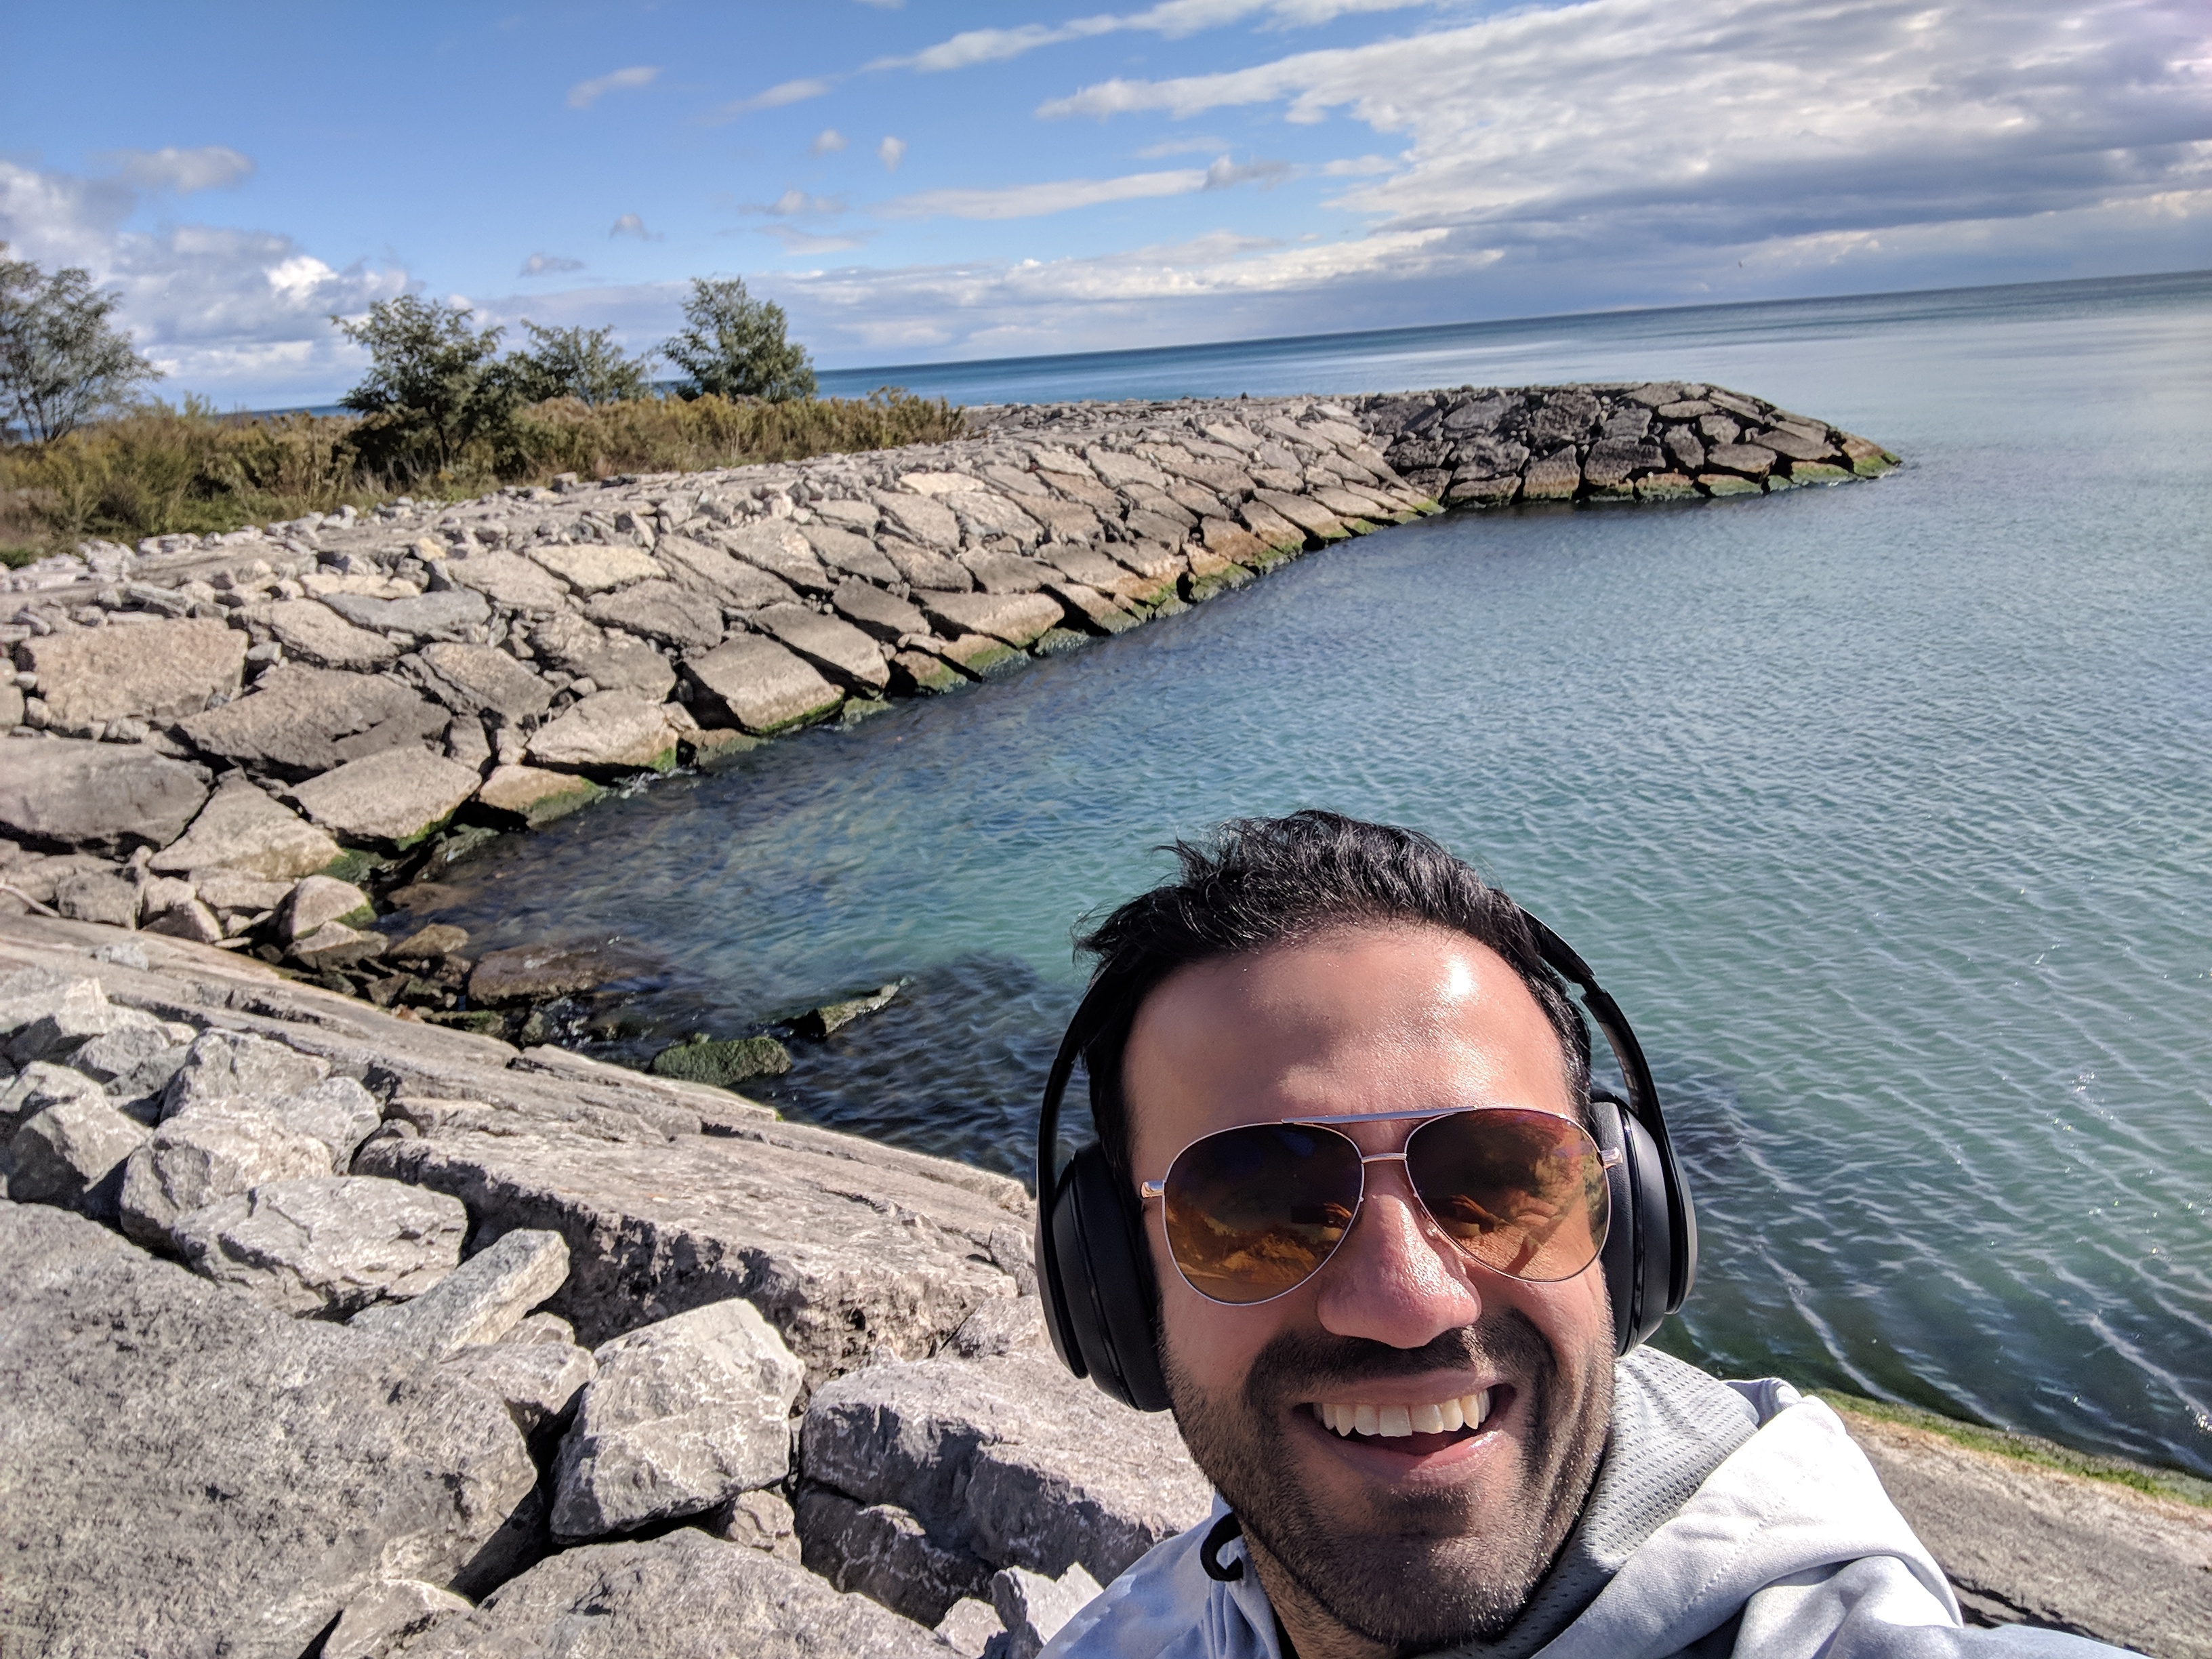 Shabbir Evershine is smiling taking a selfie, wearing sunglasses and has black headphones on his head. He's wearing a grey hoodie sweater. He's standing on rocks at a pier in Toronto. Beautiful blue water surrounds him also with a nice blue and white sky.